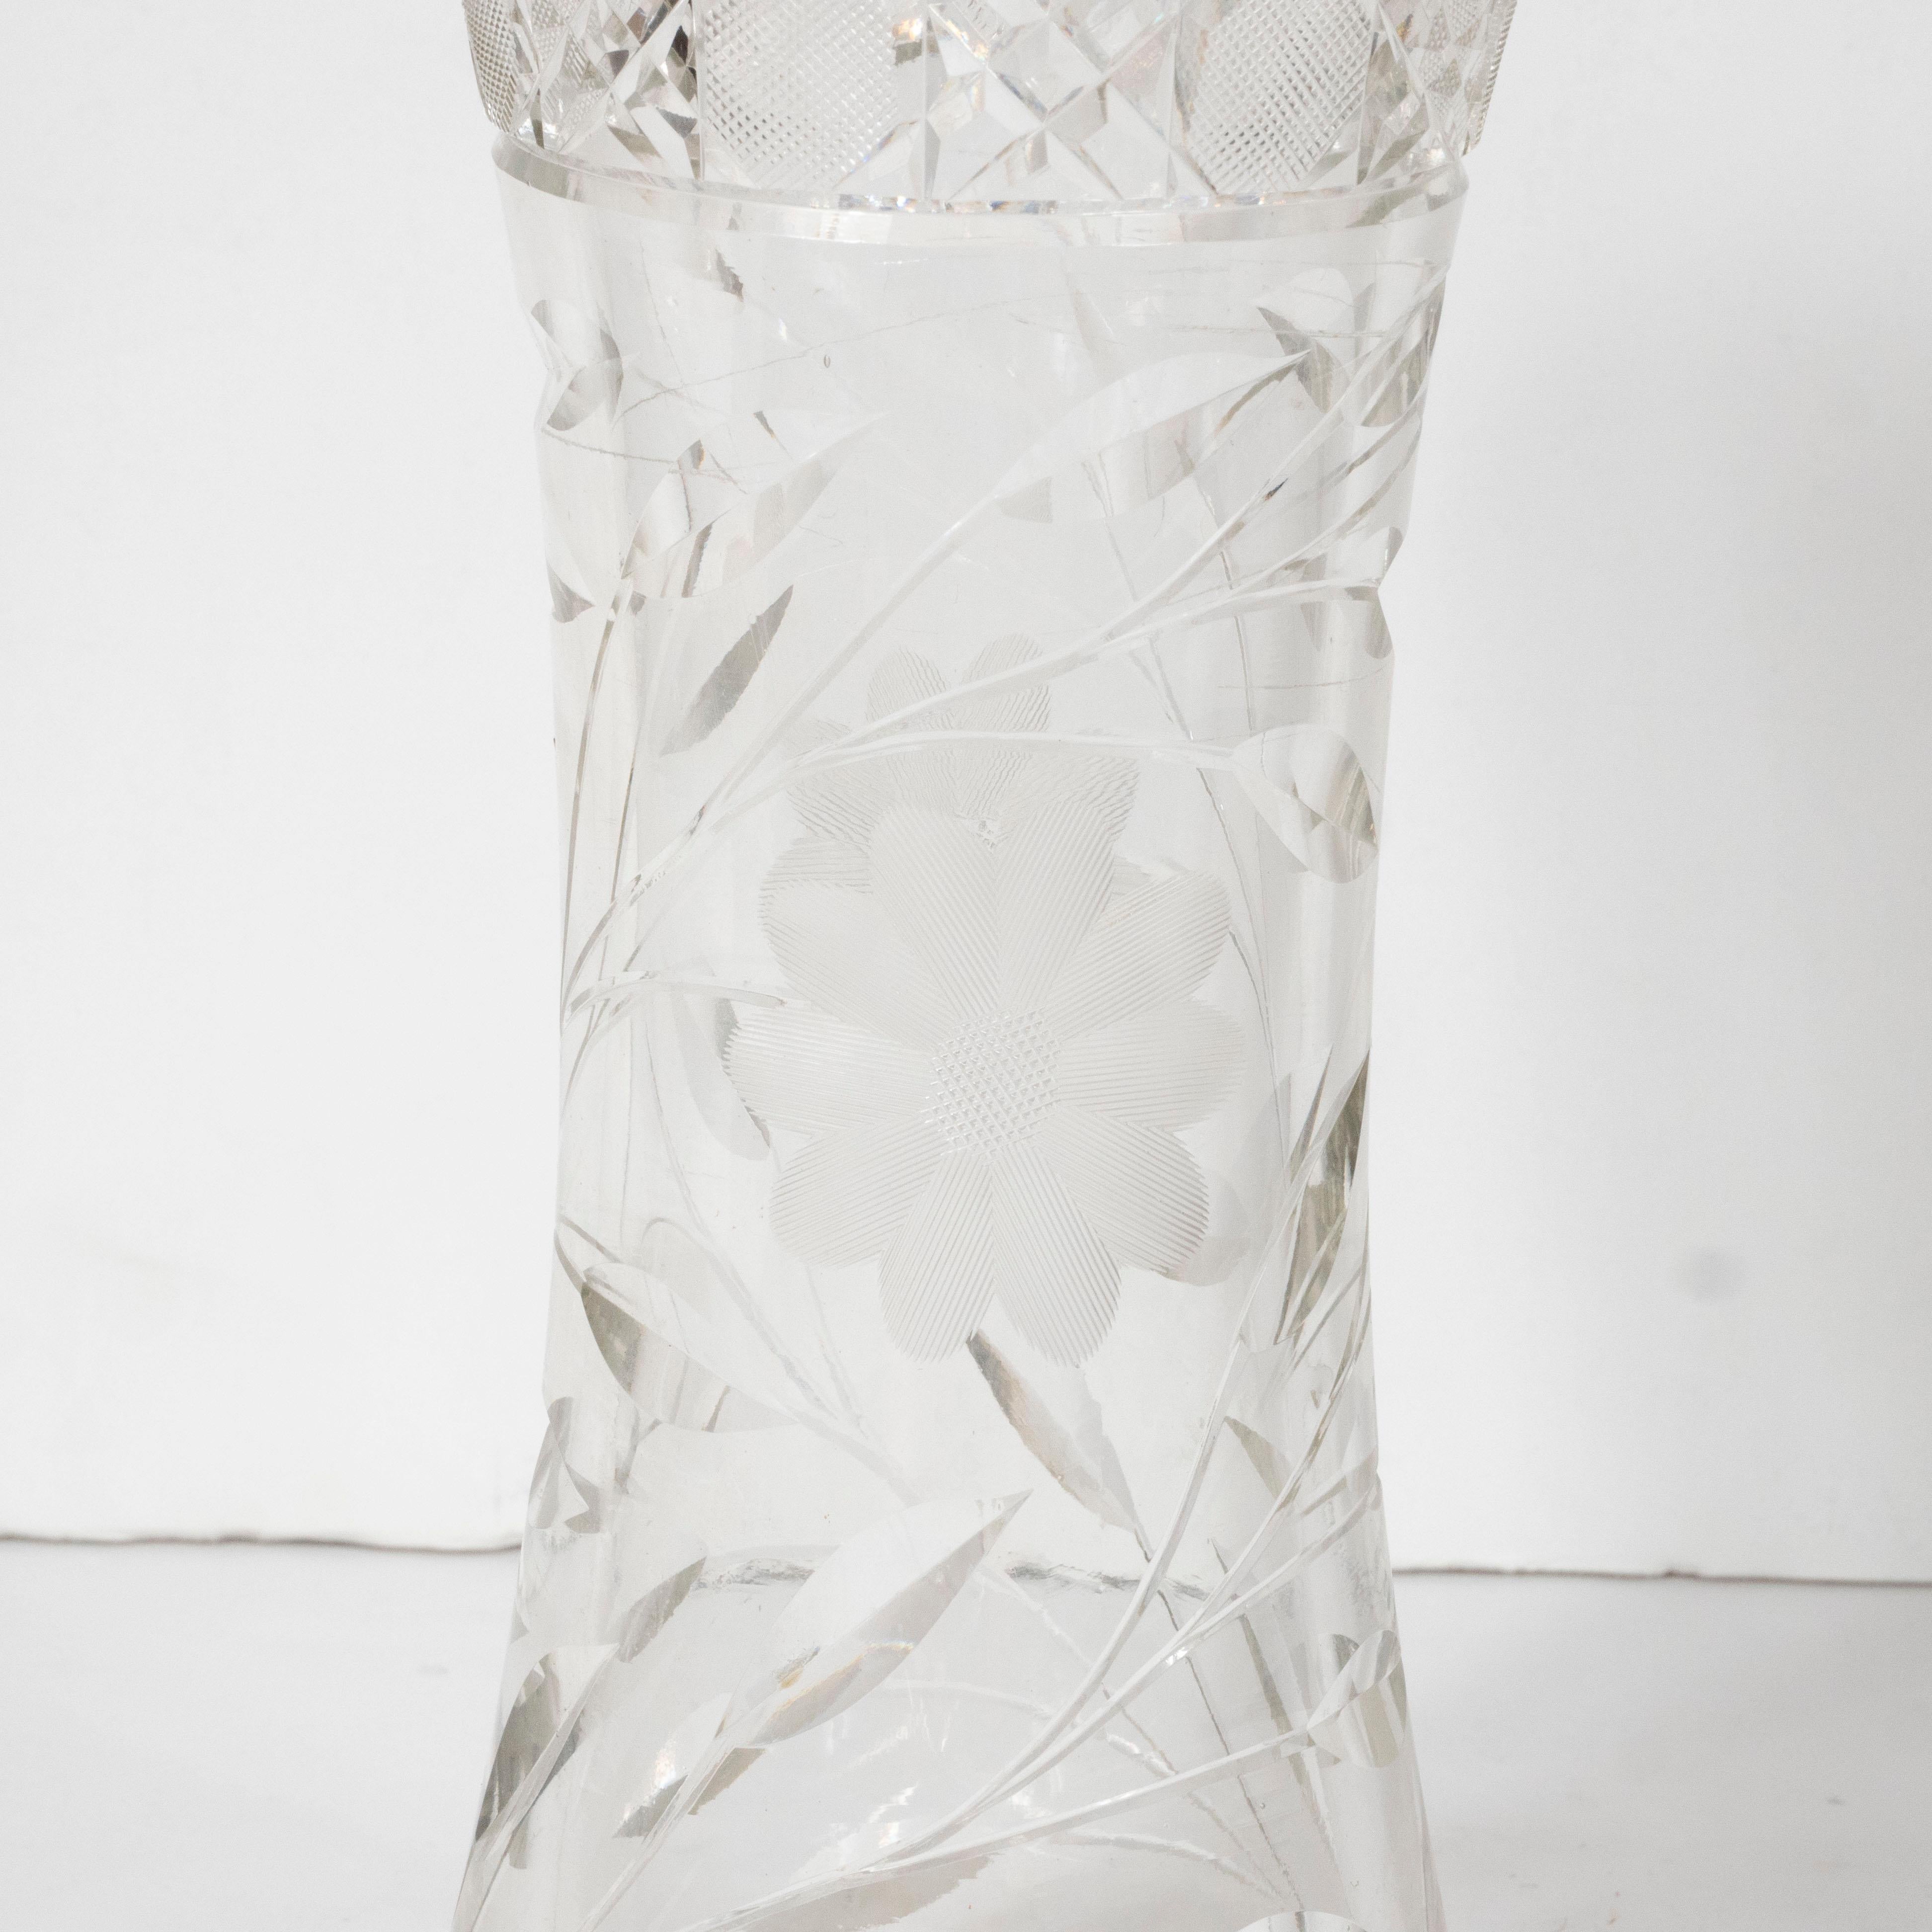 This beautiful brilliant cut glass vase was realized in the United States, circa 1920. It offers an austere hourglass form; an intricately cut neck with an abundance of geometric patternation; as well as floral designs etched into the translucent